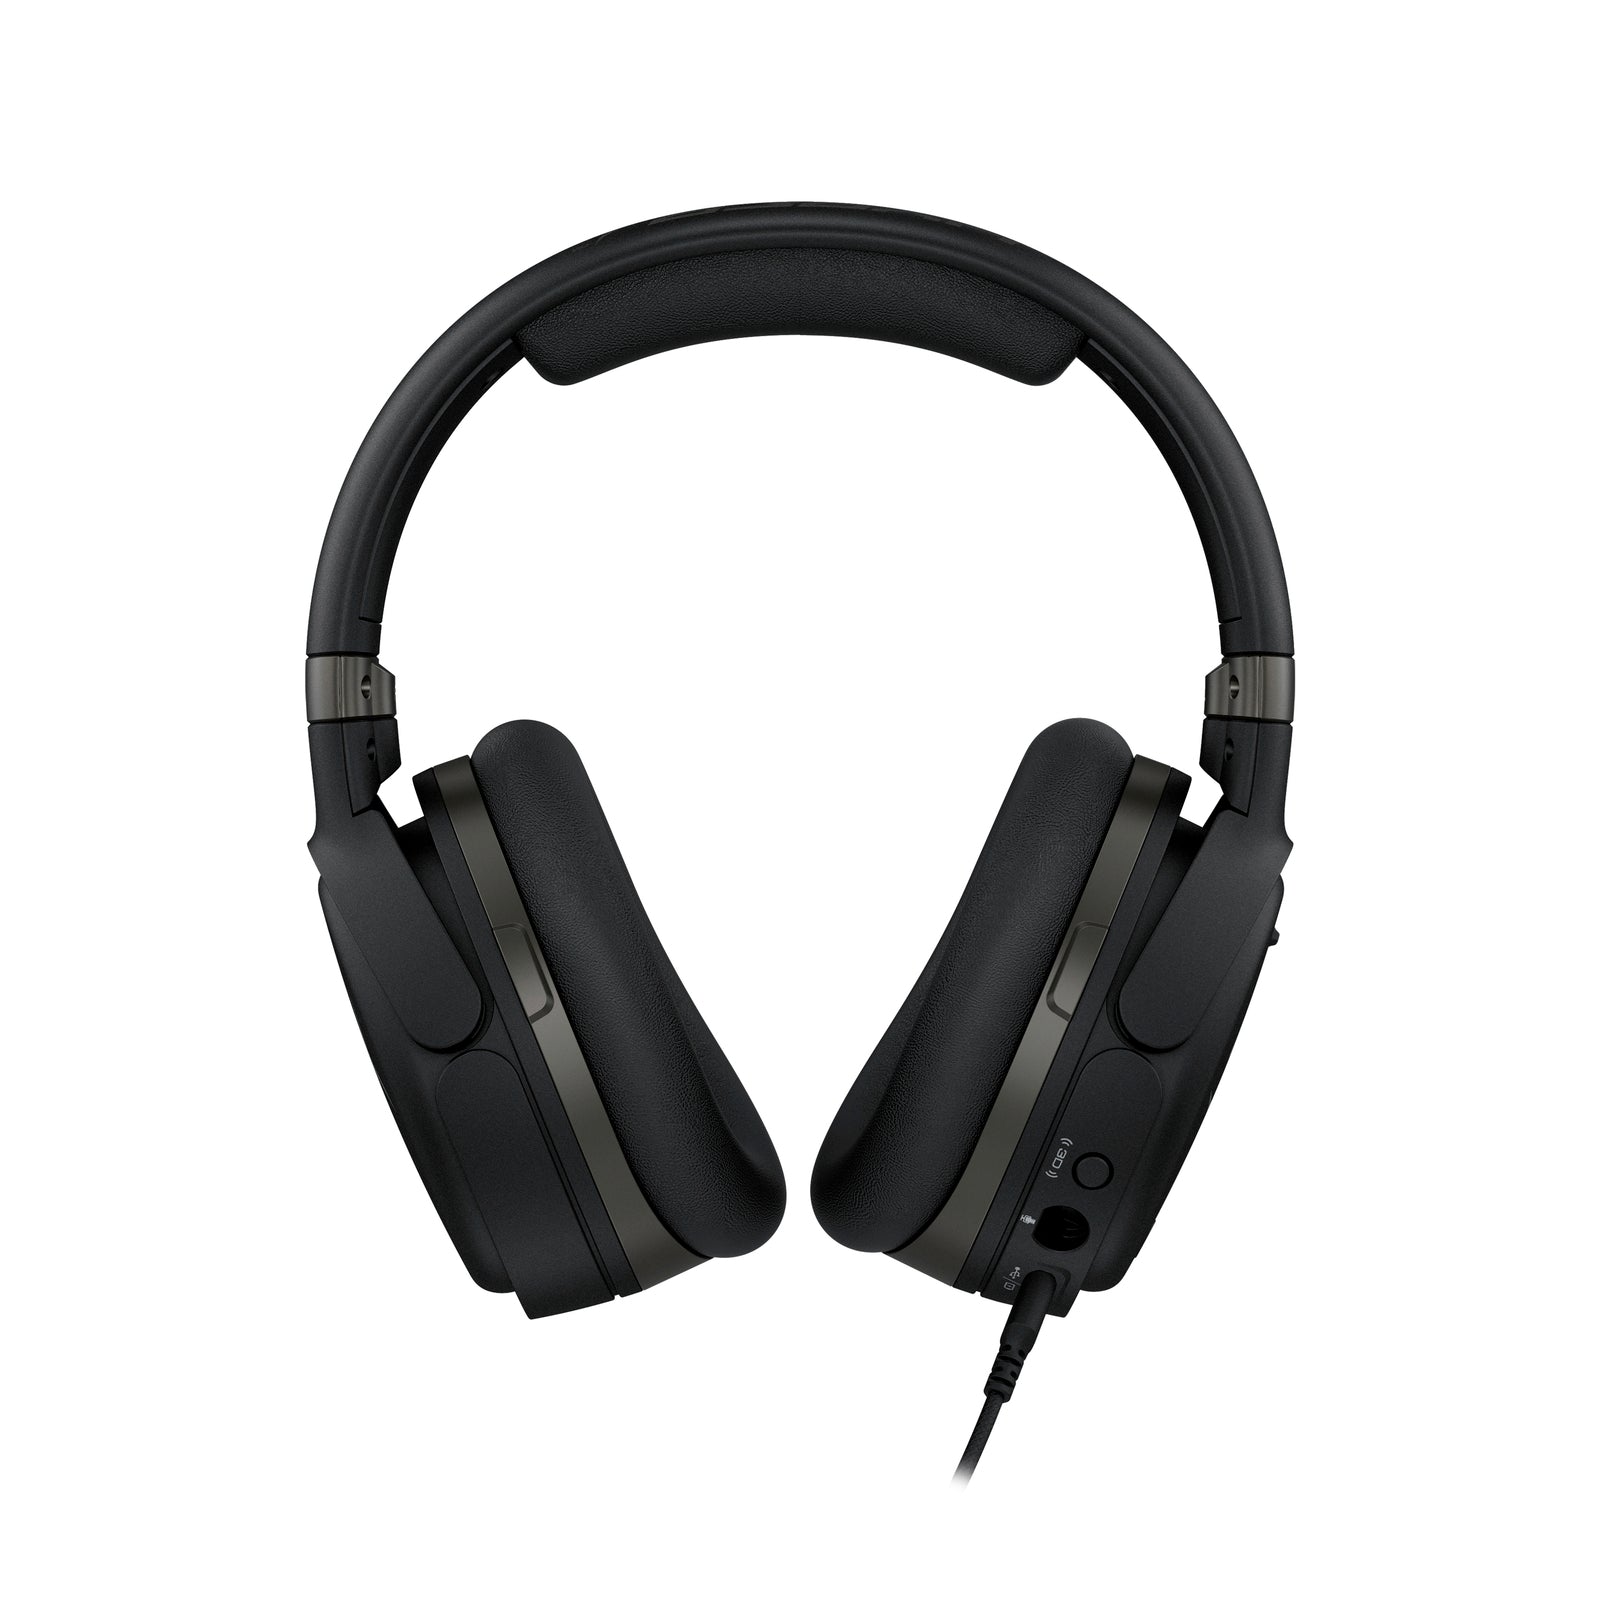 Front side view of HyperX Cloud Orbit S gaming headset